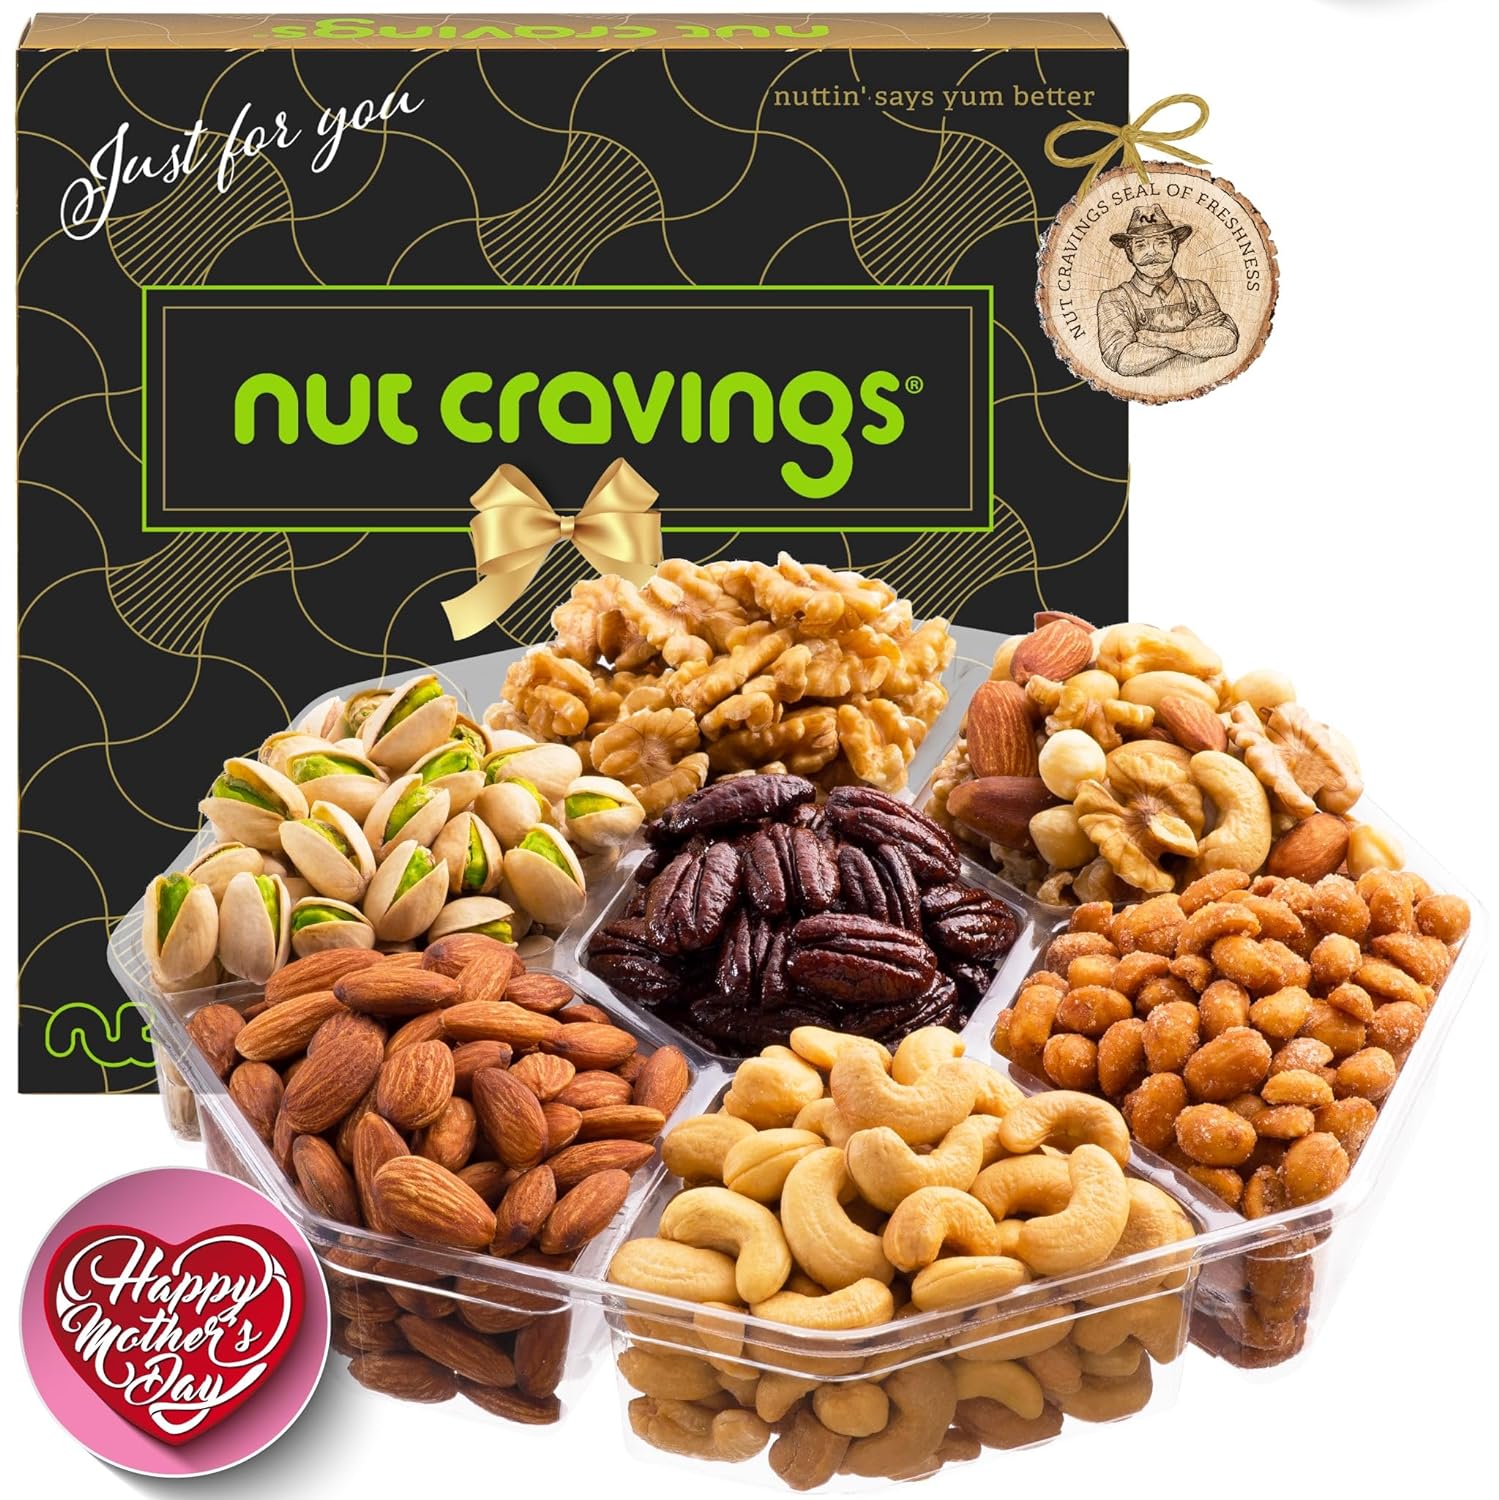 Nut Cravings Gourmet Collection - Mothers Day Mixed Nuts Gift Basket in Black Gold Box (7 Assortments, 2 LB) Arrangement Platter, Birthday Care Package - Healthy Kosher USA Made